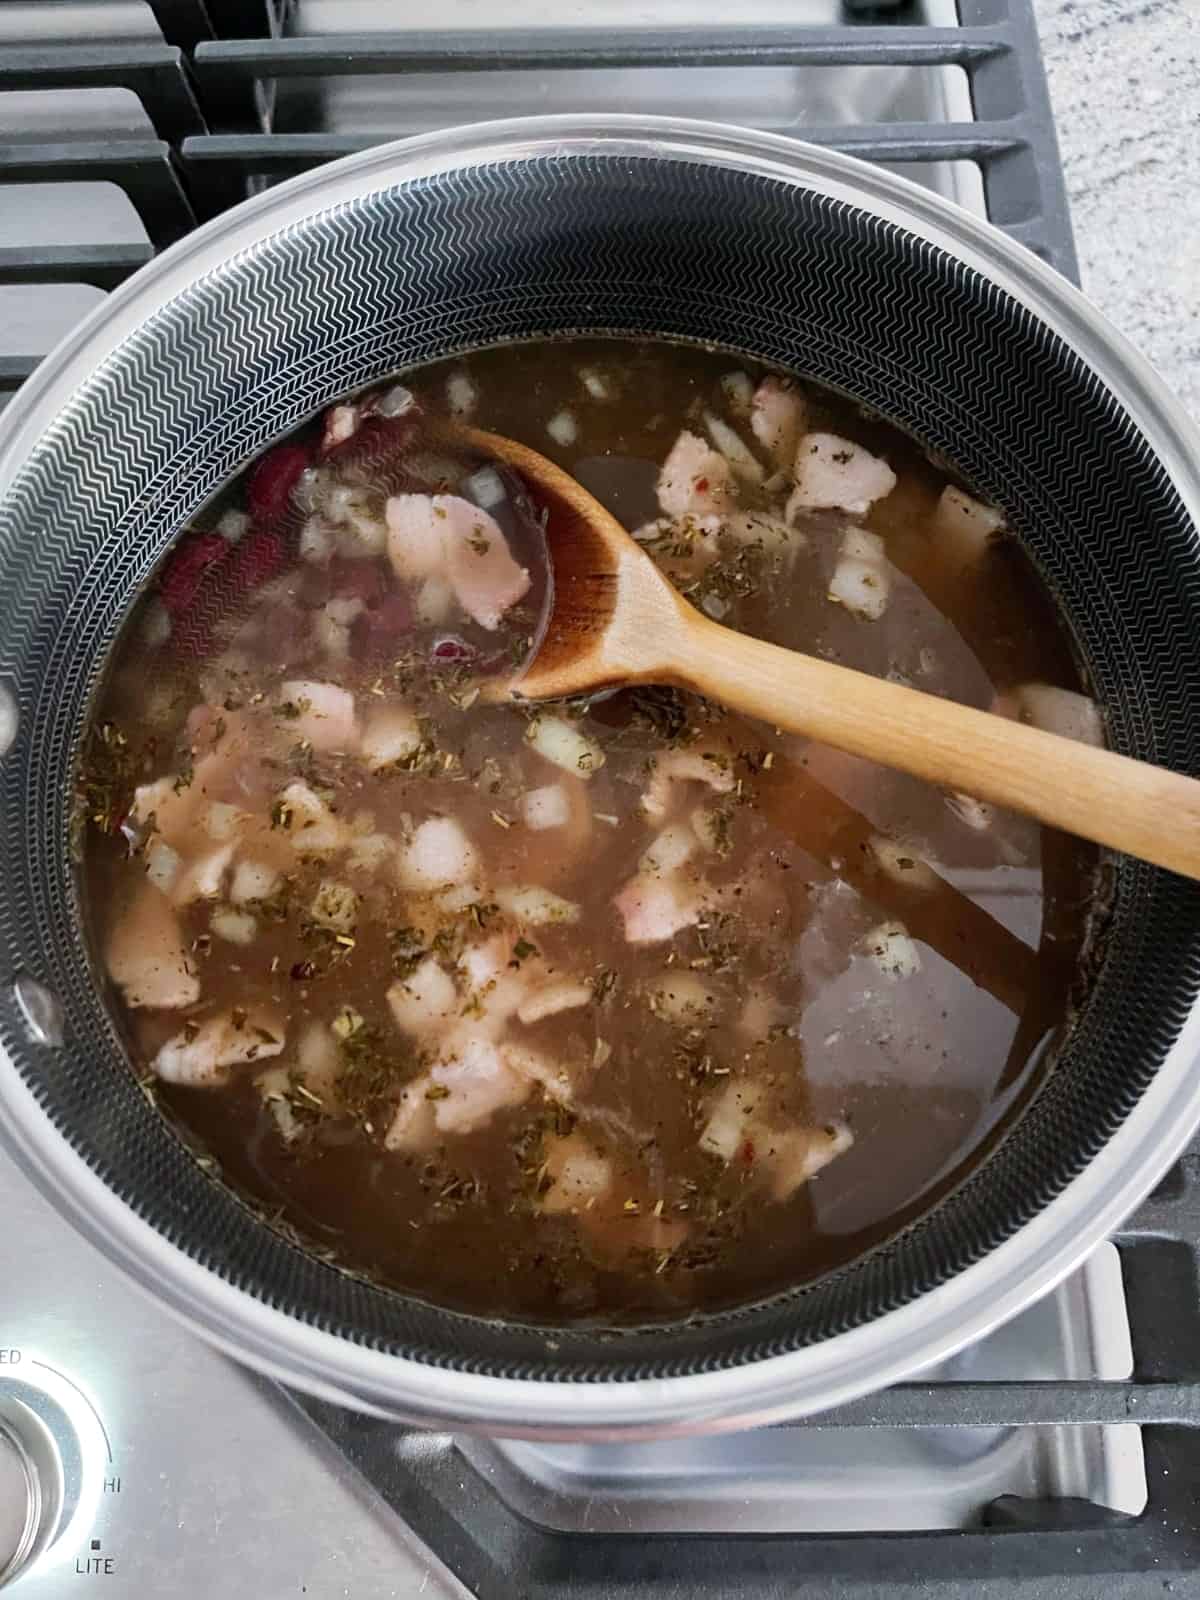 Making Jamaican Jerk Red Bean and Rice Soup in a Crock Pot on the Stove.